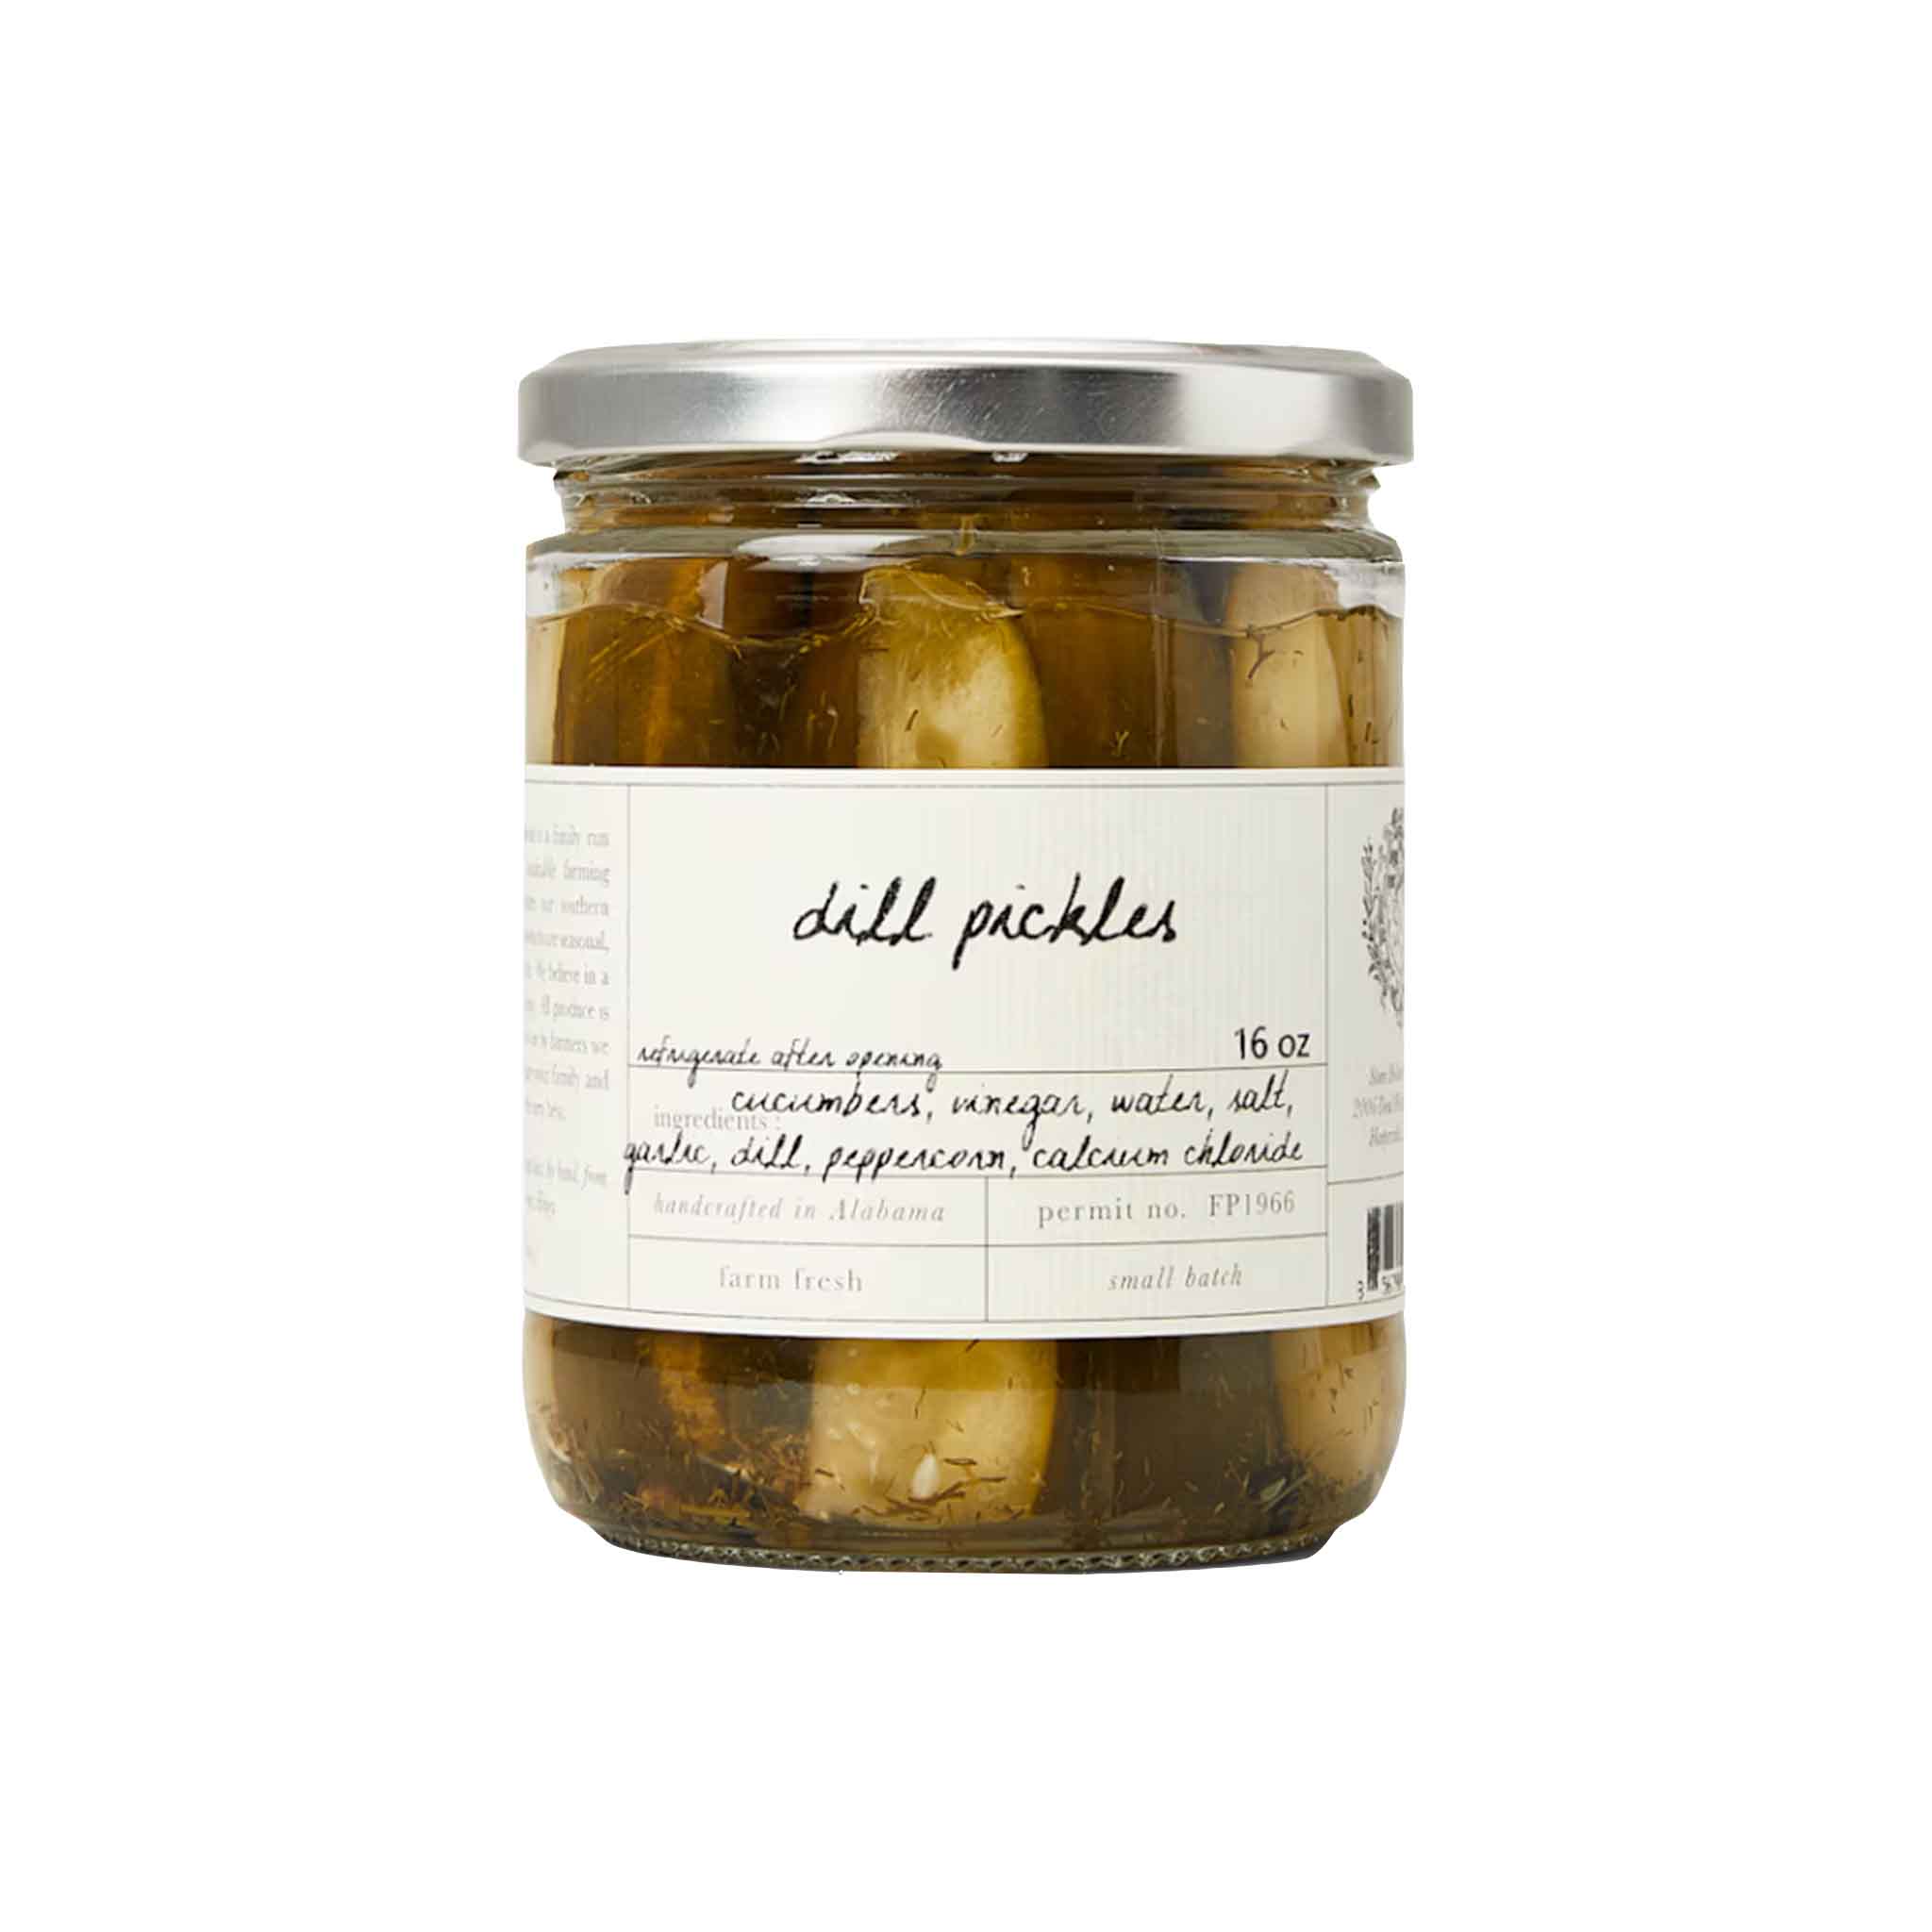 STONE HOLLOW DILL PICKLES 16oz